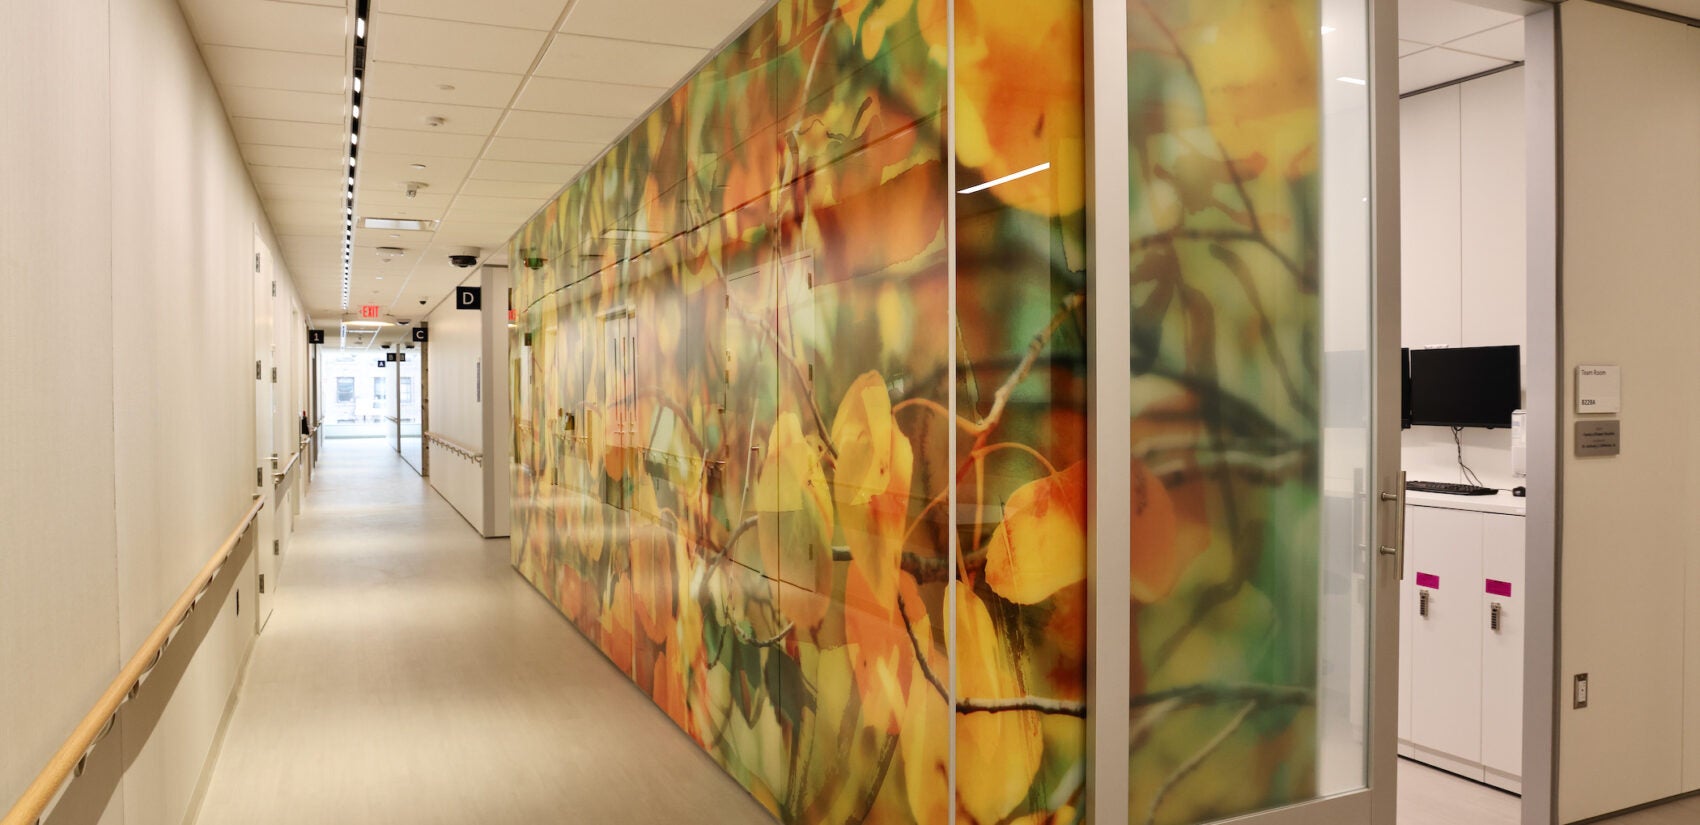 a hallway at the Honickman Center with a colorful and calming wall